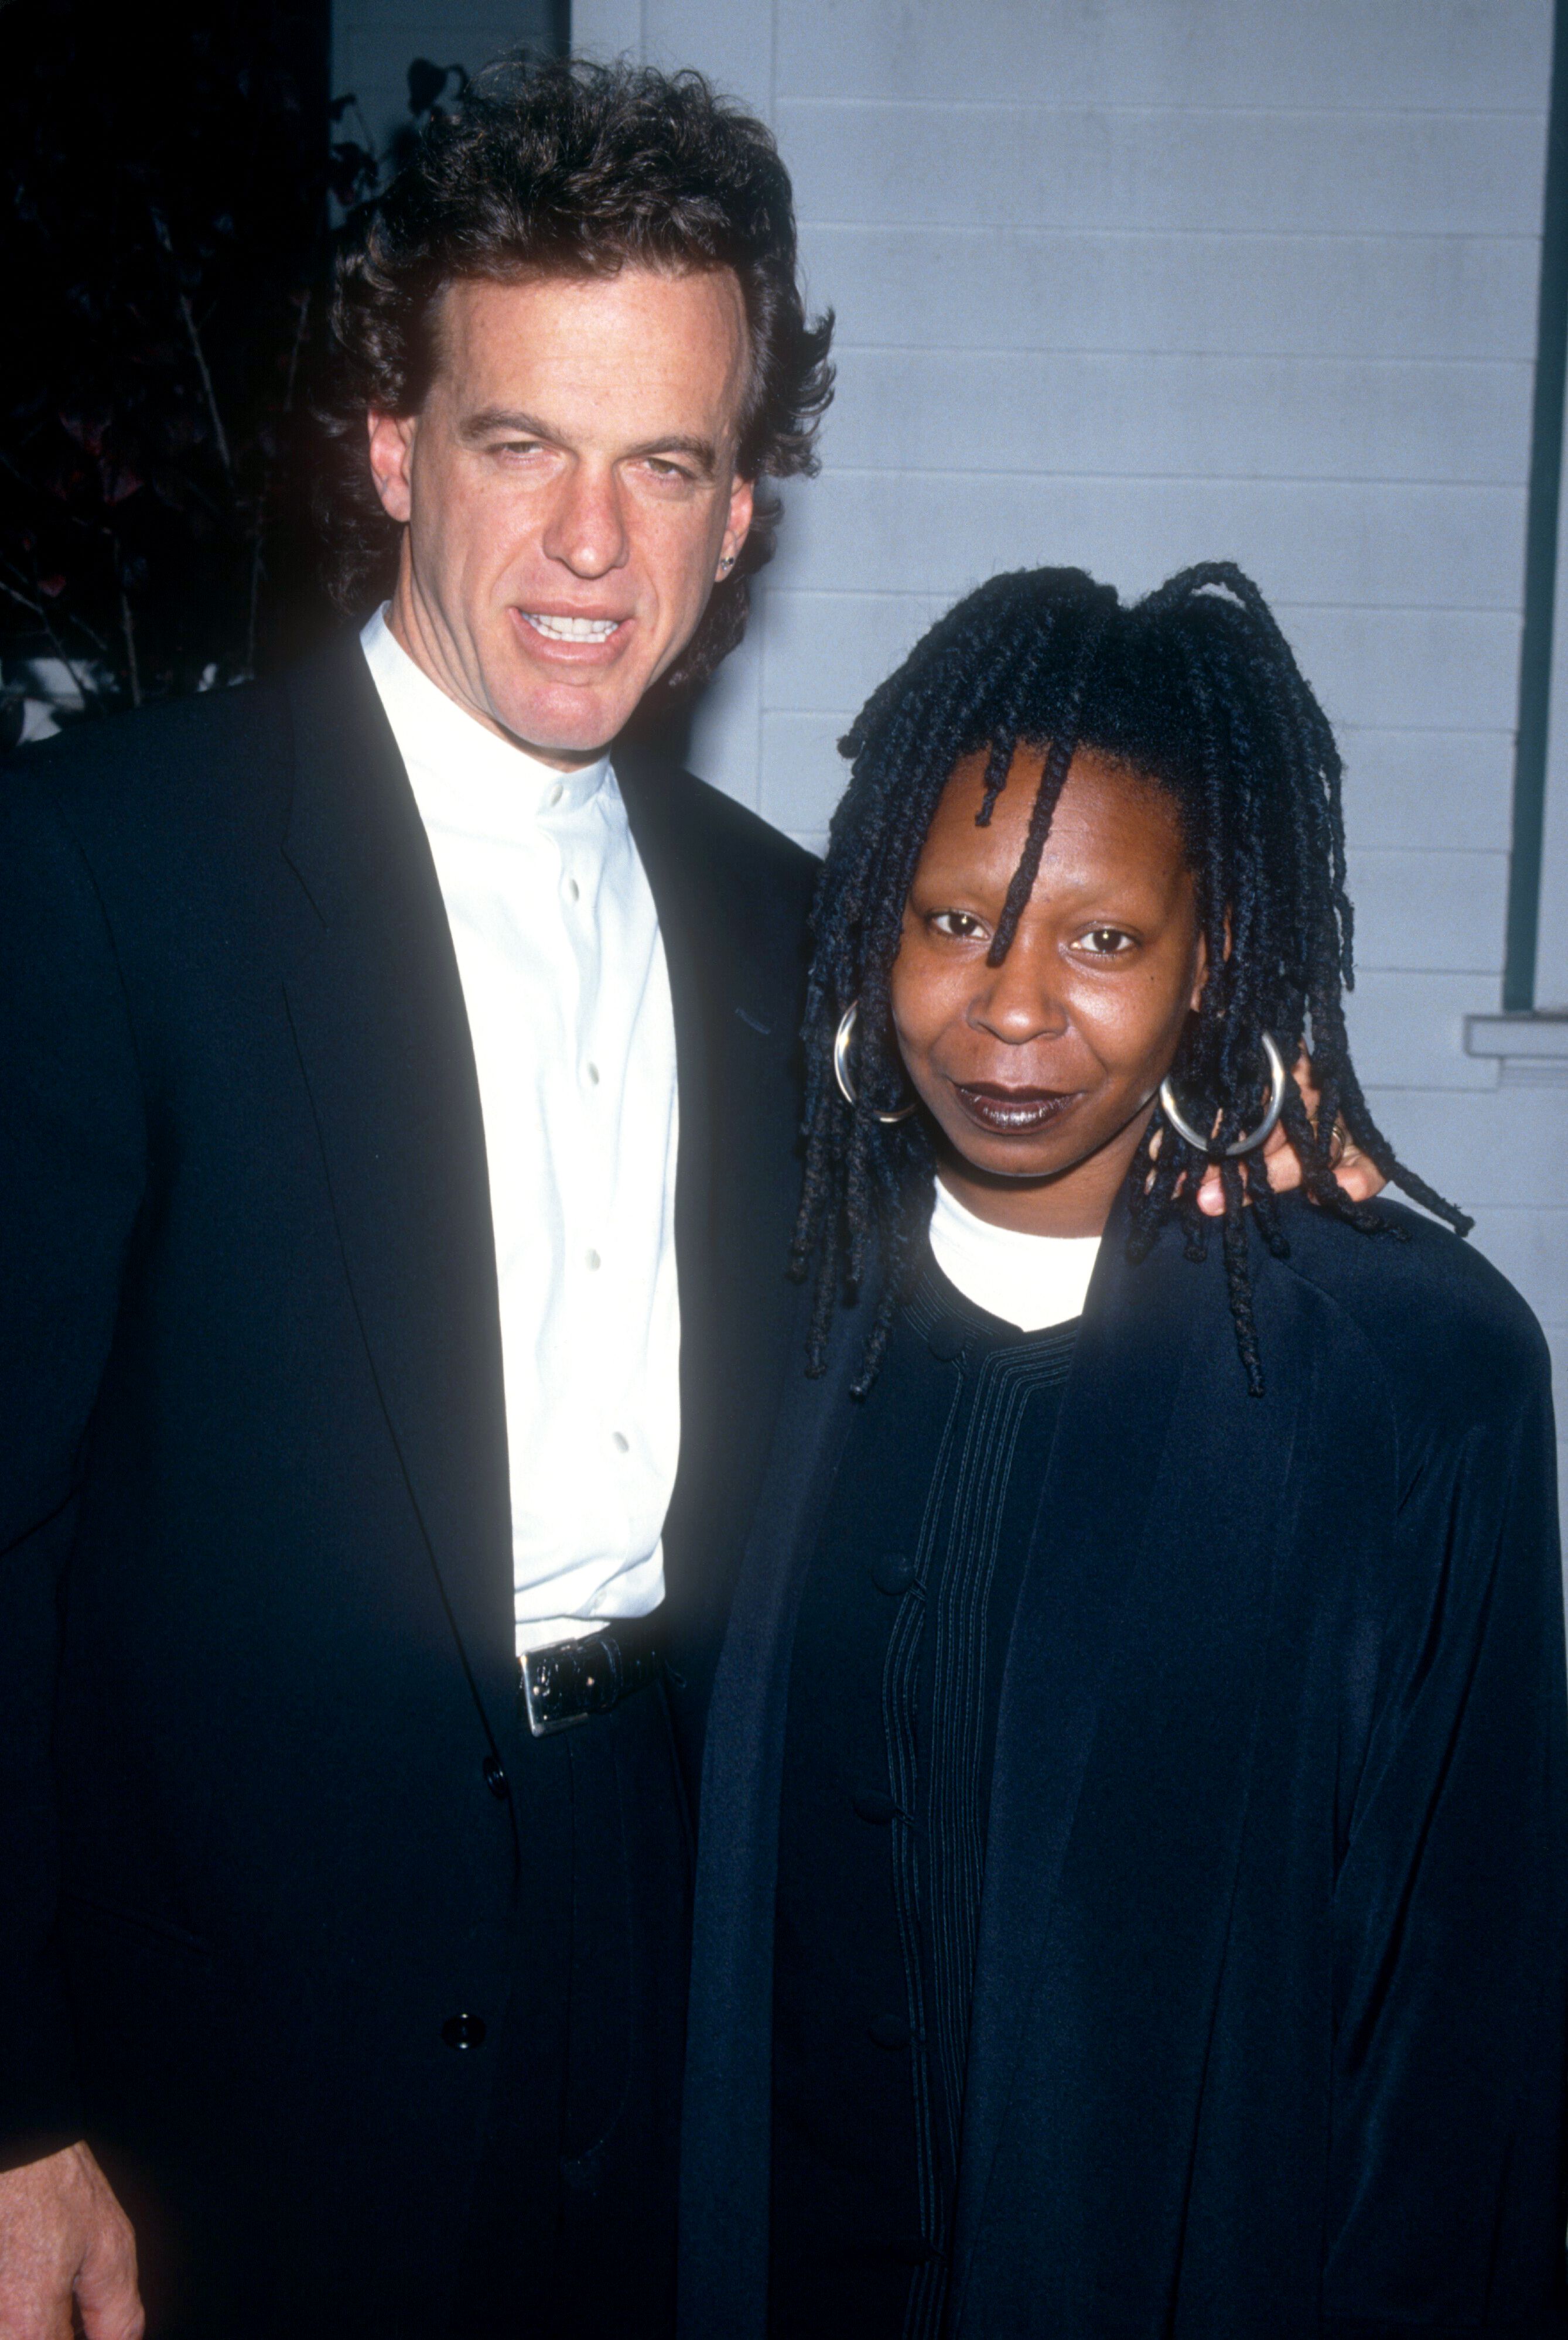 What Is Whoopi Goldberg's Net Worth? Is She Married?